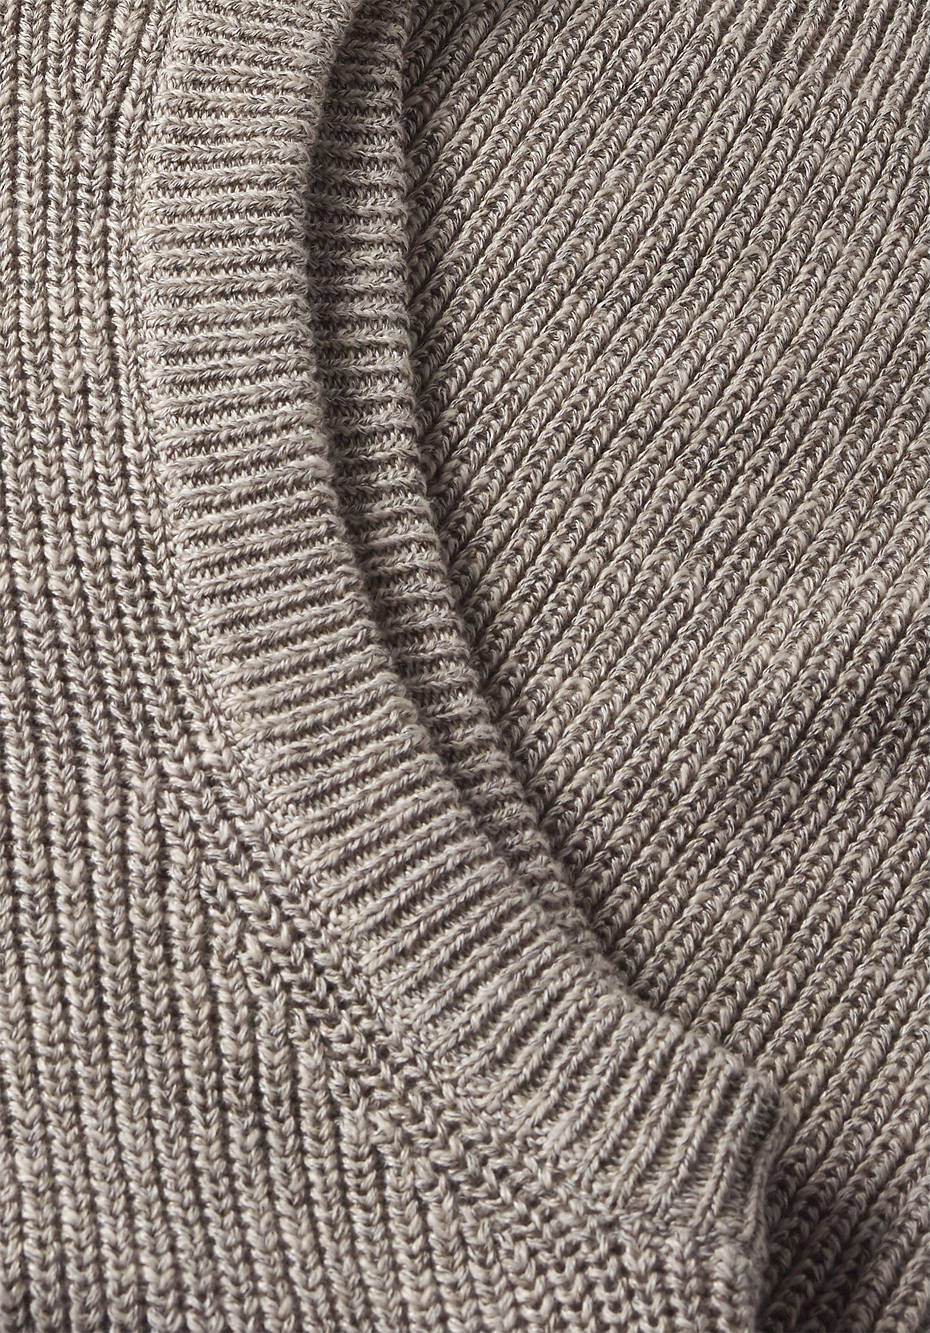 V-neck sweater made of organic cotton with linen